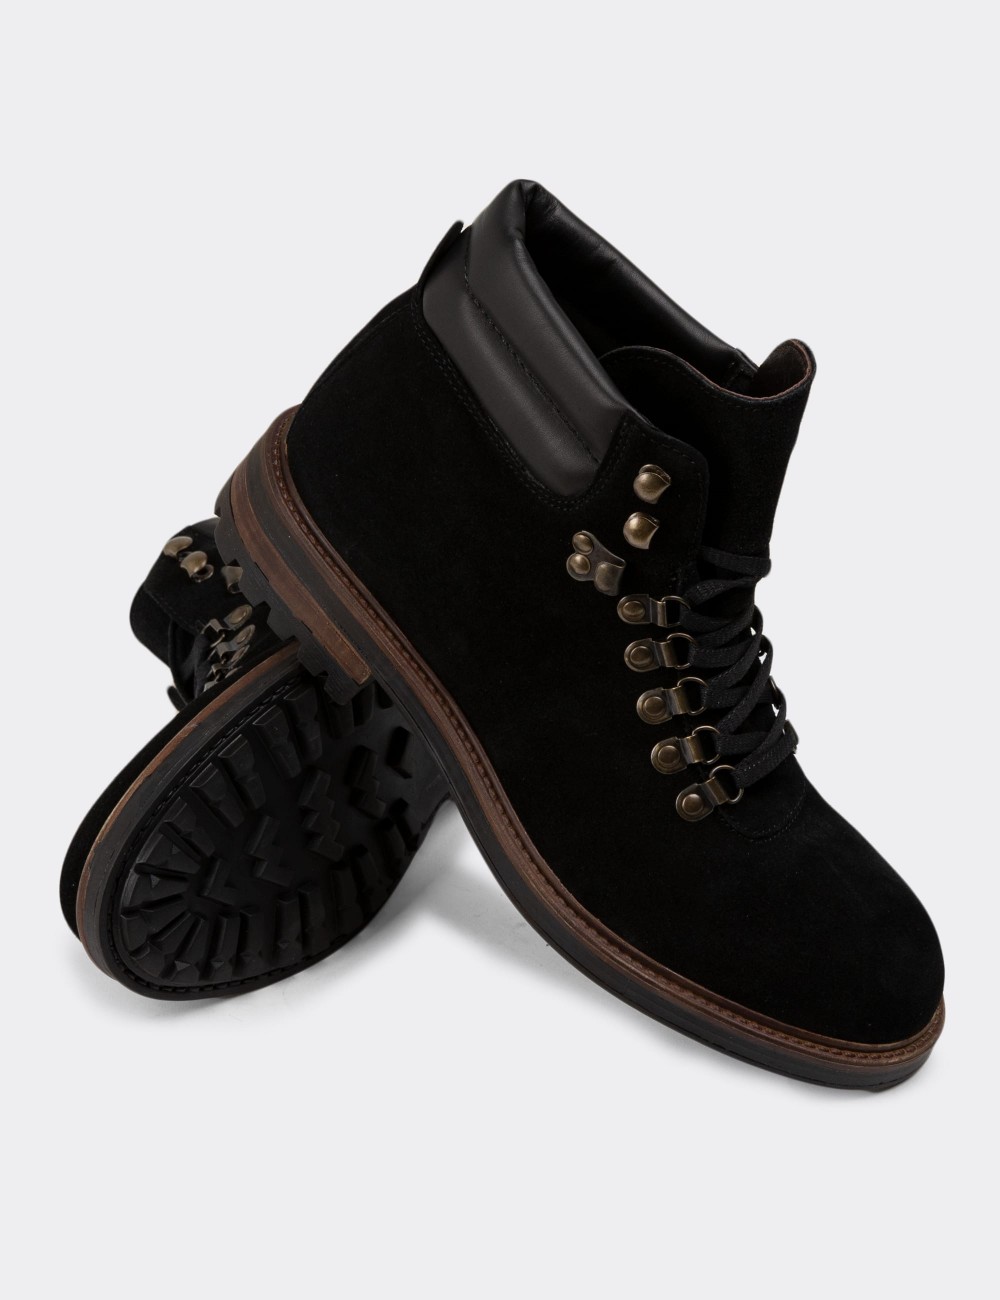 Black Suede Leather Boots - 01923MSYHC02